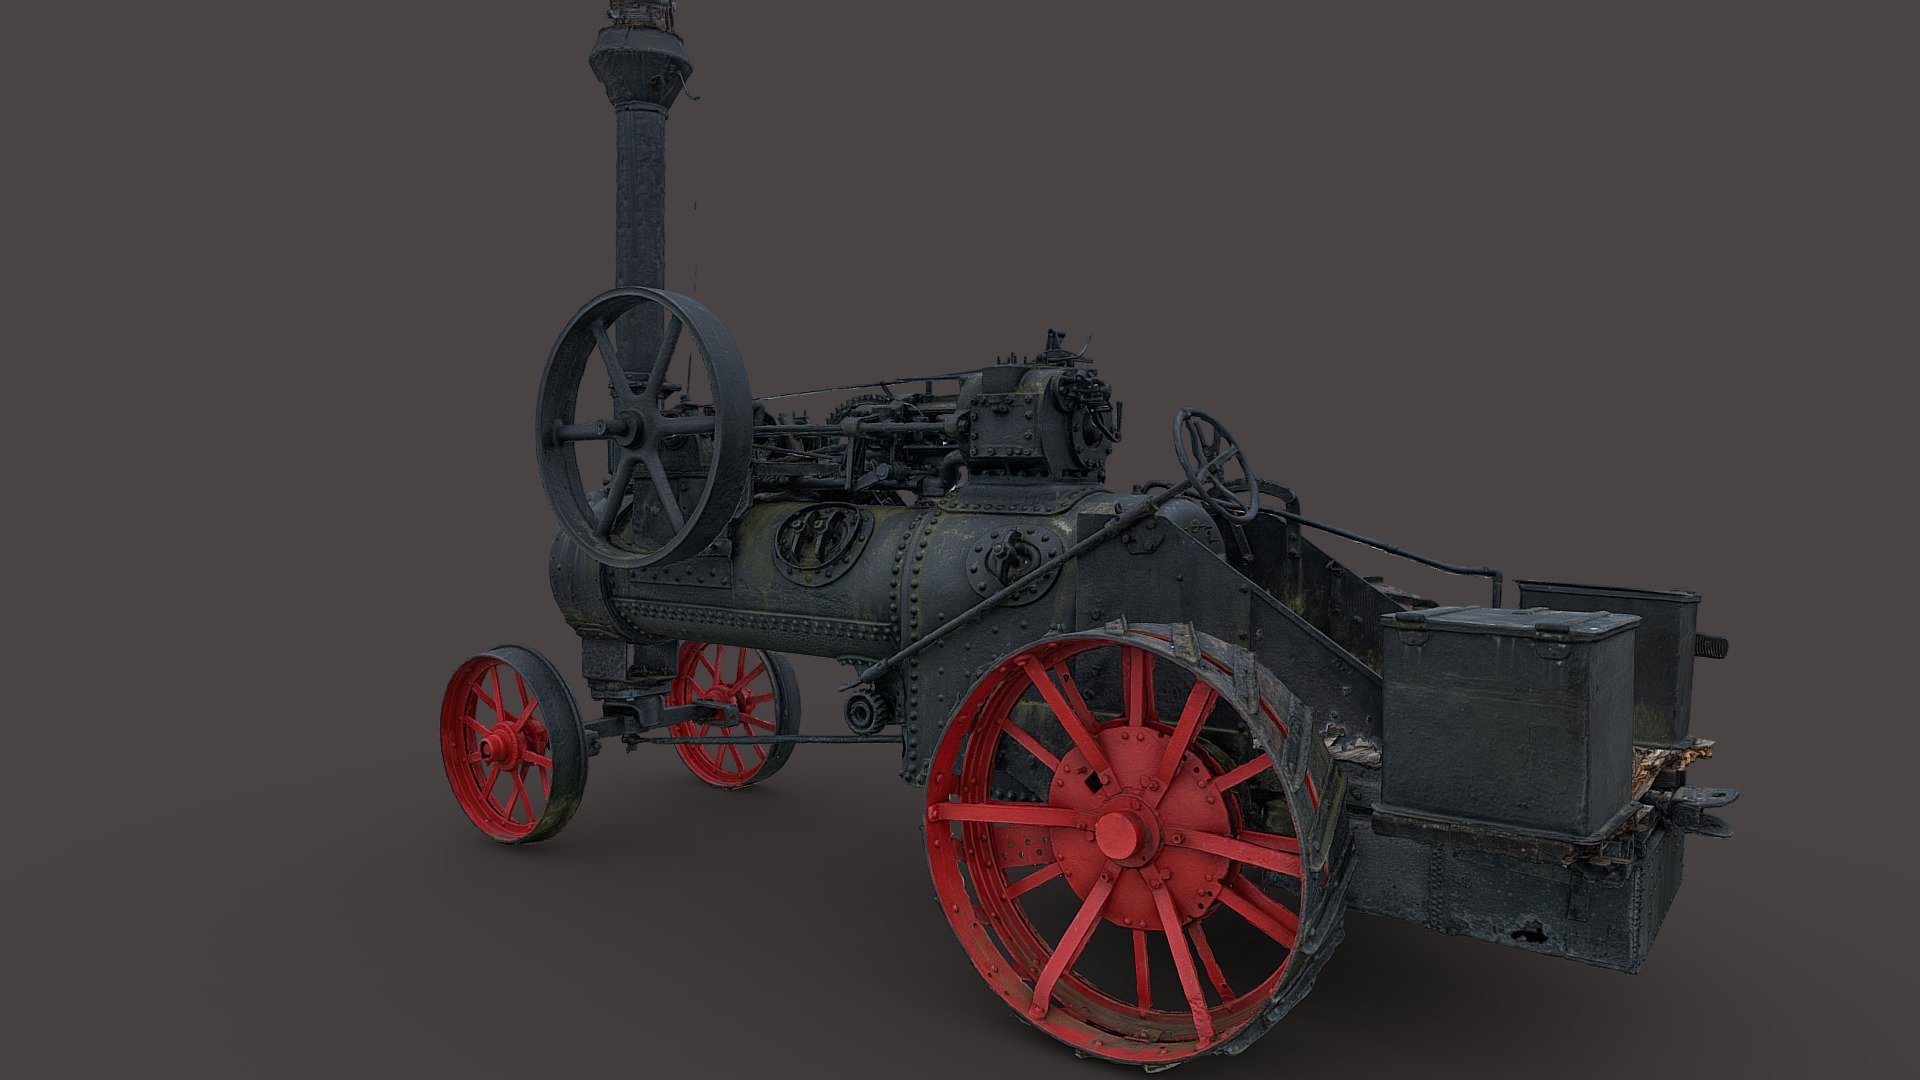 A traction engine is a steam-powered tractor used to move heavy loads on roads, plough ground or to provide power at a chosen location. The name derives from the Latin tractus, meaning ‘drawn’, since the prime function of any traction engine is to draw a load behind it. They are sometimes called road locomotives to distinguish them from railway locomotives – that is, steam engines that run on rails.

They became popular in industrialised countries from around 1850, when the first self-propelled portable steam engines for agricultural use were developed. Production continued well into the early part of the 20th century, when competition from internal combustion engine-powered tractors saw them fall out of favour.

Original placed at: https://goo.gl/maps/stU4pjEALyhctkHW7 Kagu, Rapla, Estonia.

Photogrammetry capture created in RealityCapture from 719 images.

© Saulius Zaura www.dronepartner.lt 2023 - Steam-powered tractor - 3D model by Saulius.Zaura 3d model